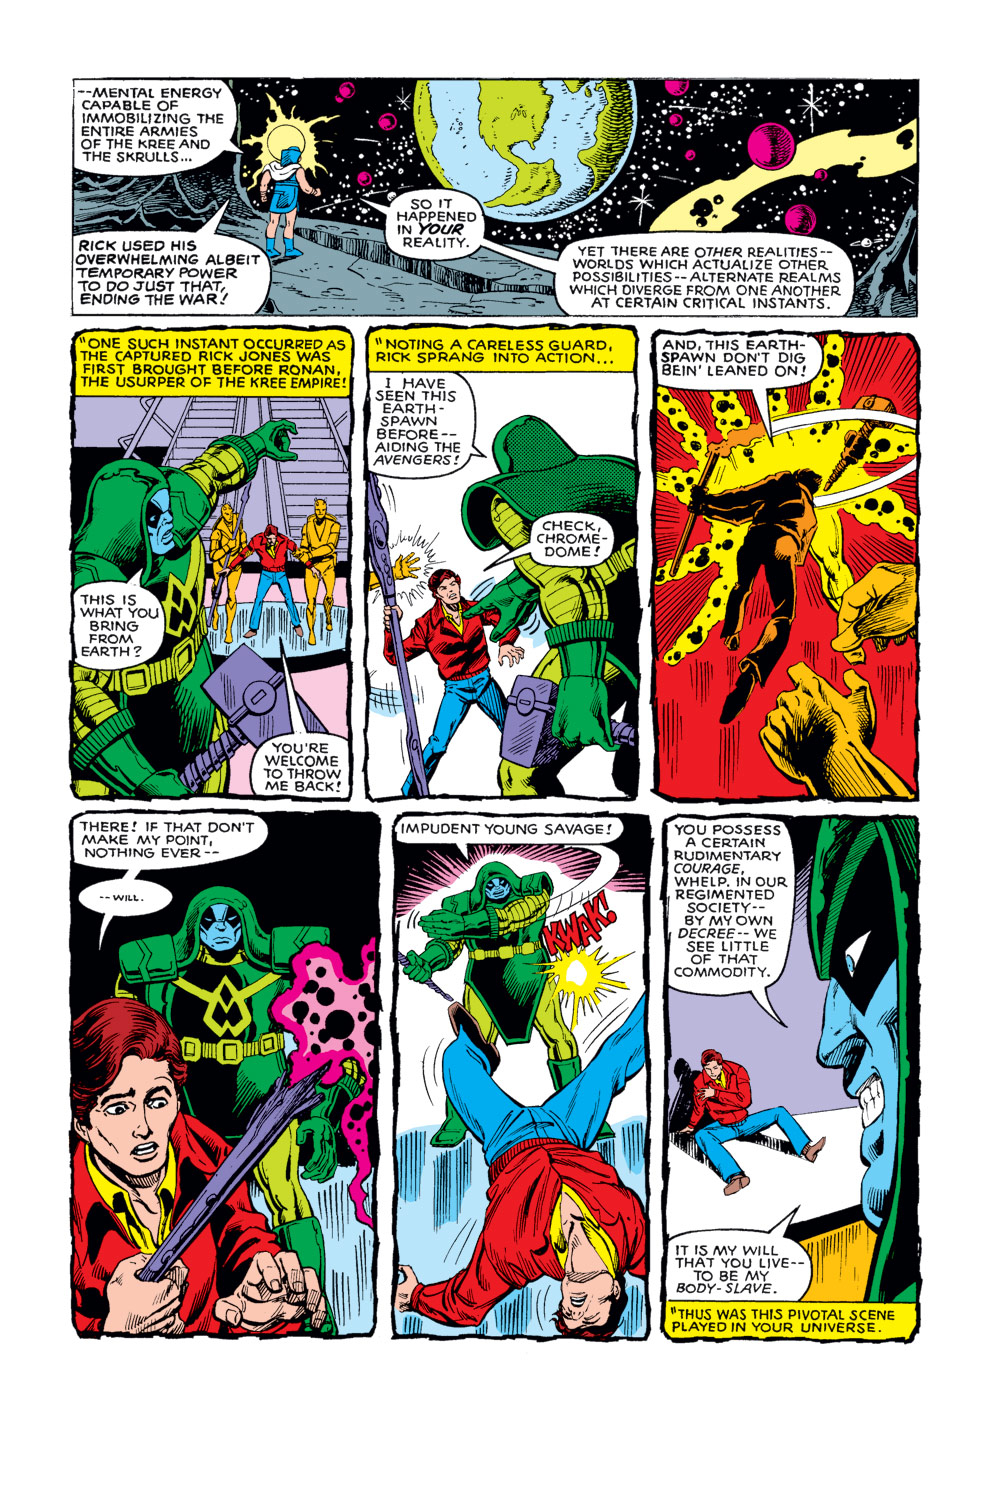 What If? (1977) issue 20 - The Avengers fought the Kree-Skrull war without Rick Jones - Page 5